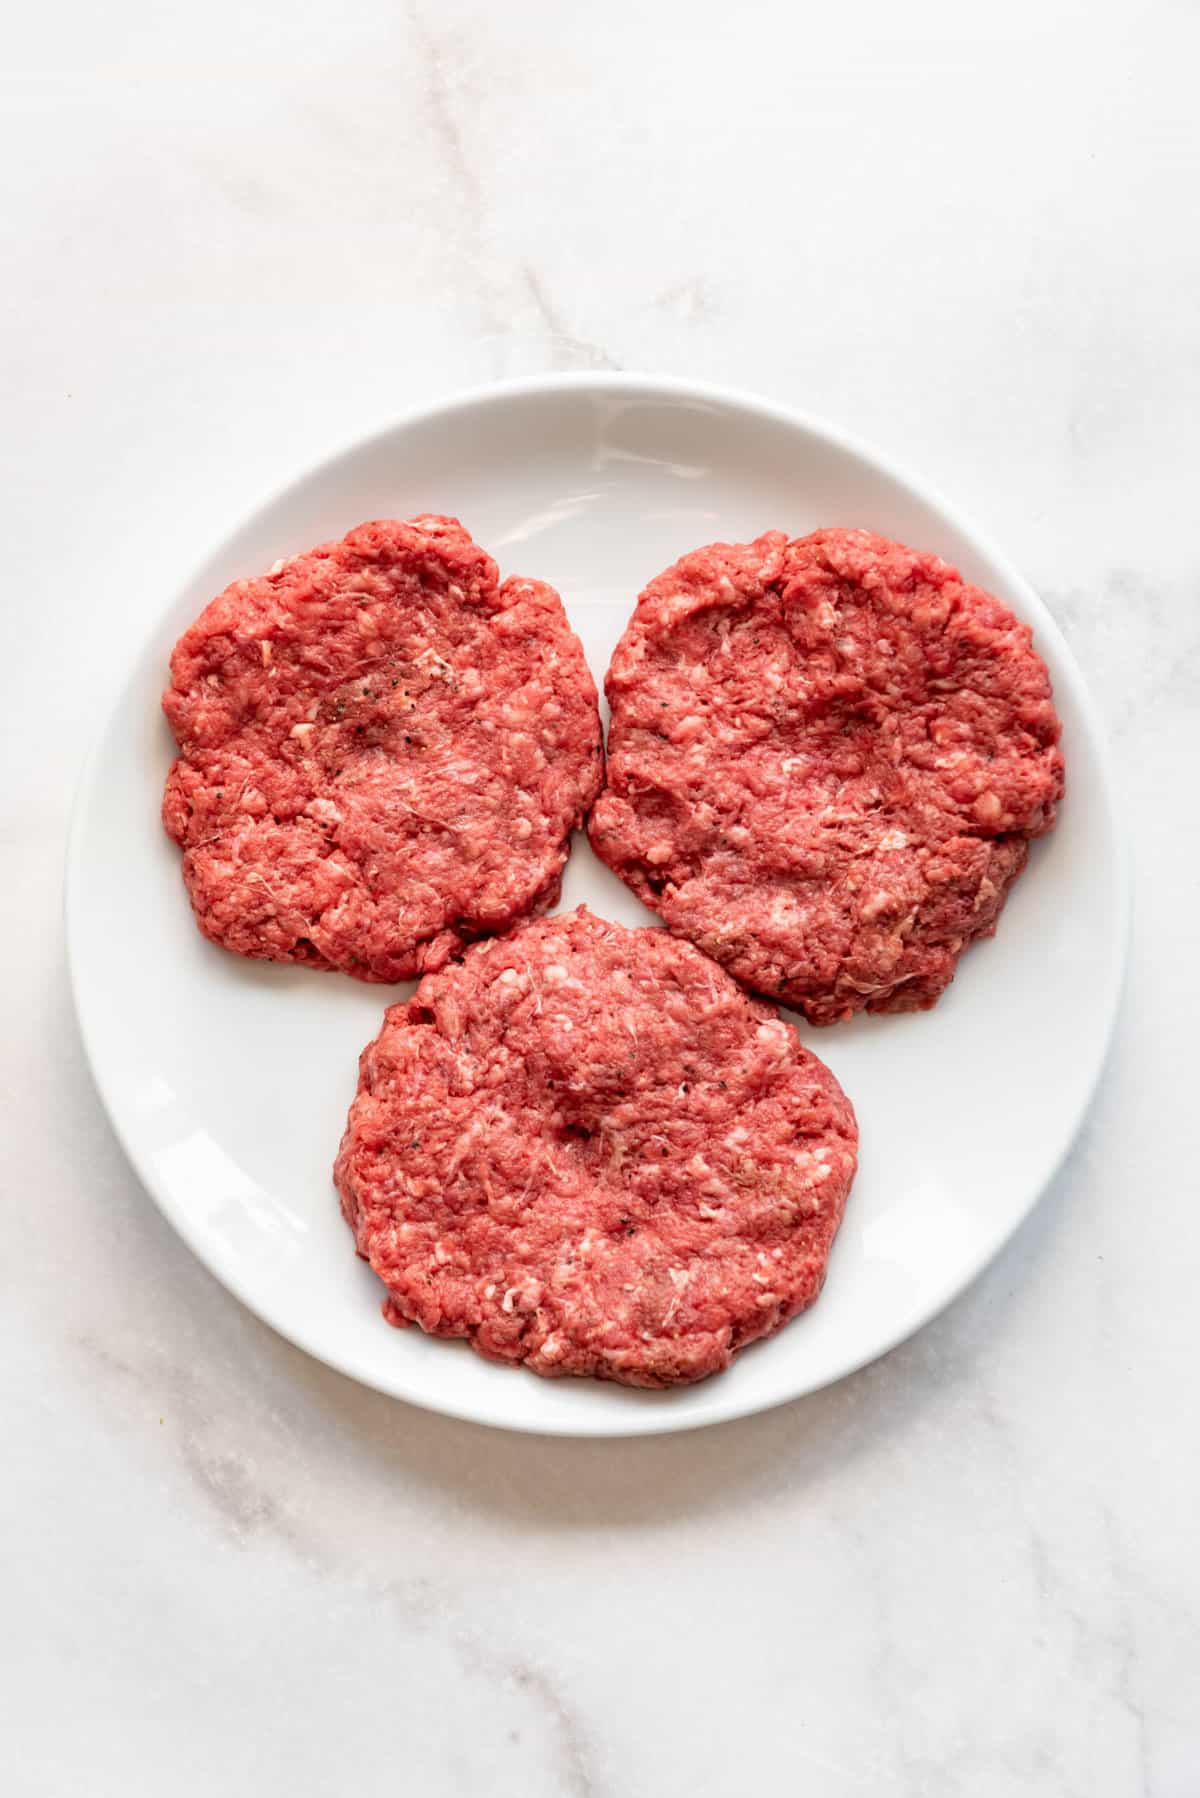 Shaping ground bison into burger patties on a white plate.